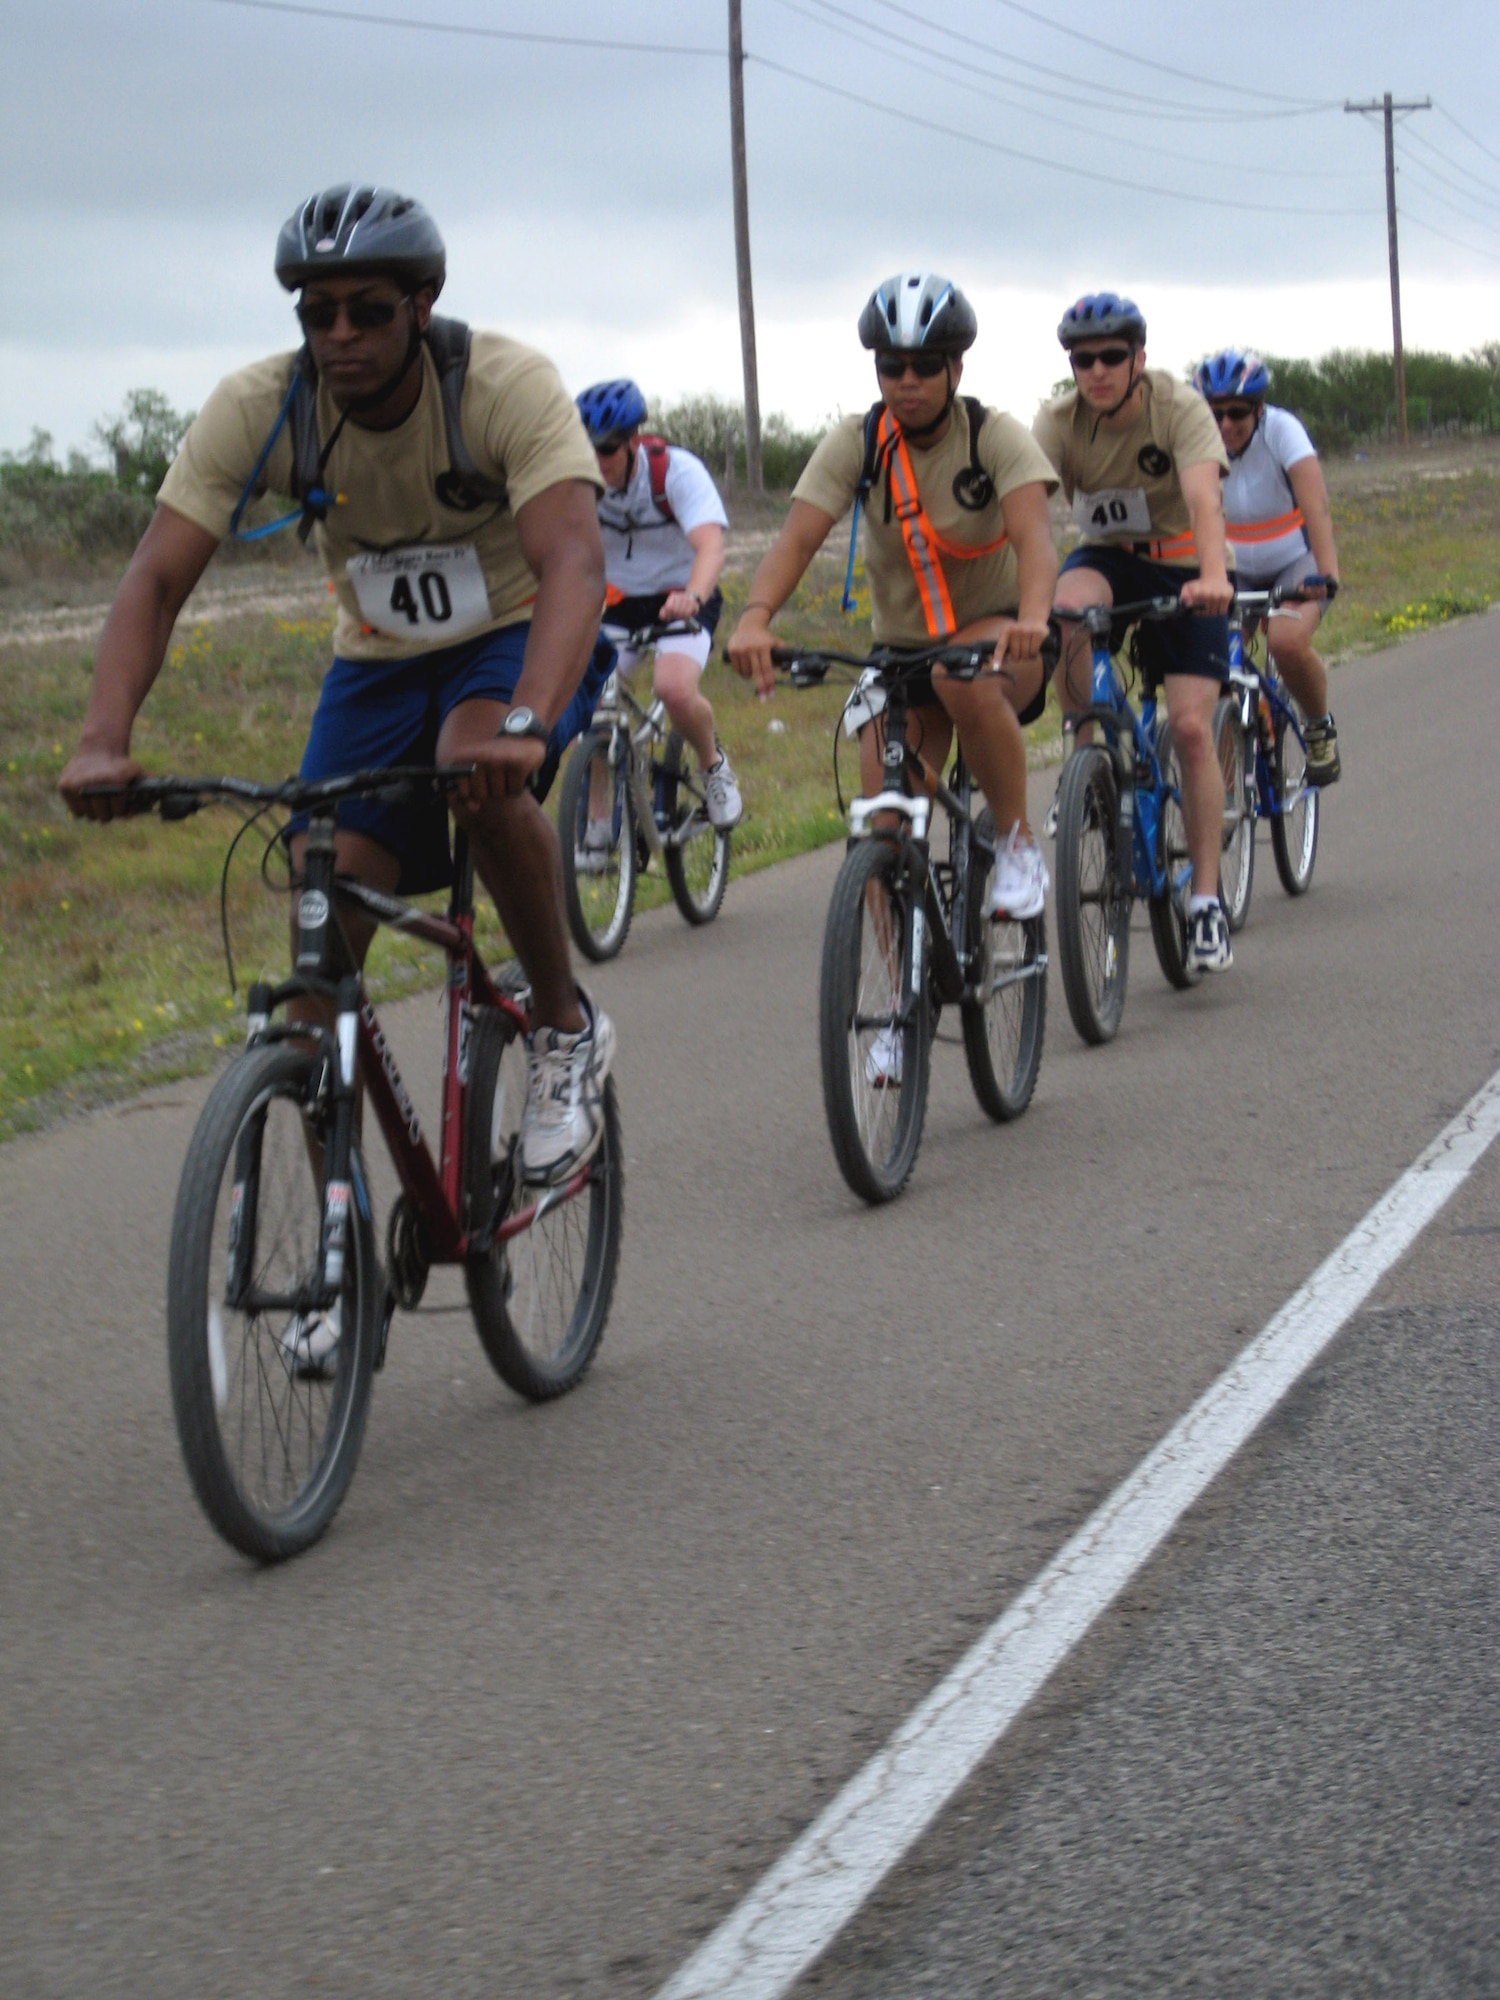 From left to right, 1st Lt. Brian Williams, Senior Airman Kamaile Chan, 2nd Lt. Joel Hansen and Col. Merrily Madero, Goodfellow Ninjas team members, complete the biking leg of the Laughlin Adventure Race April 26. (U.S. Air Force photo by Senior Airman Julio Brito)